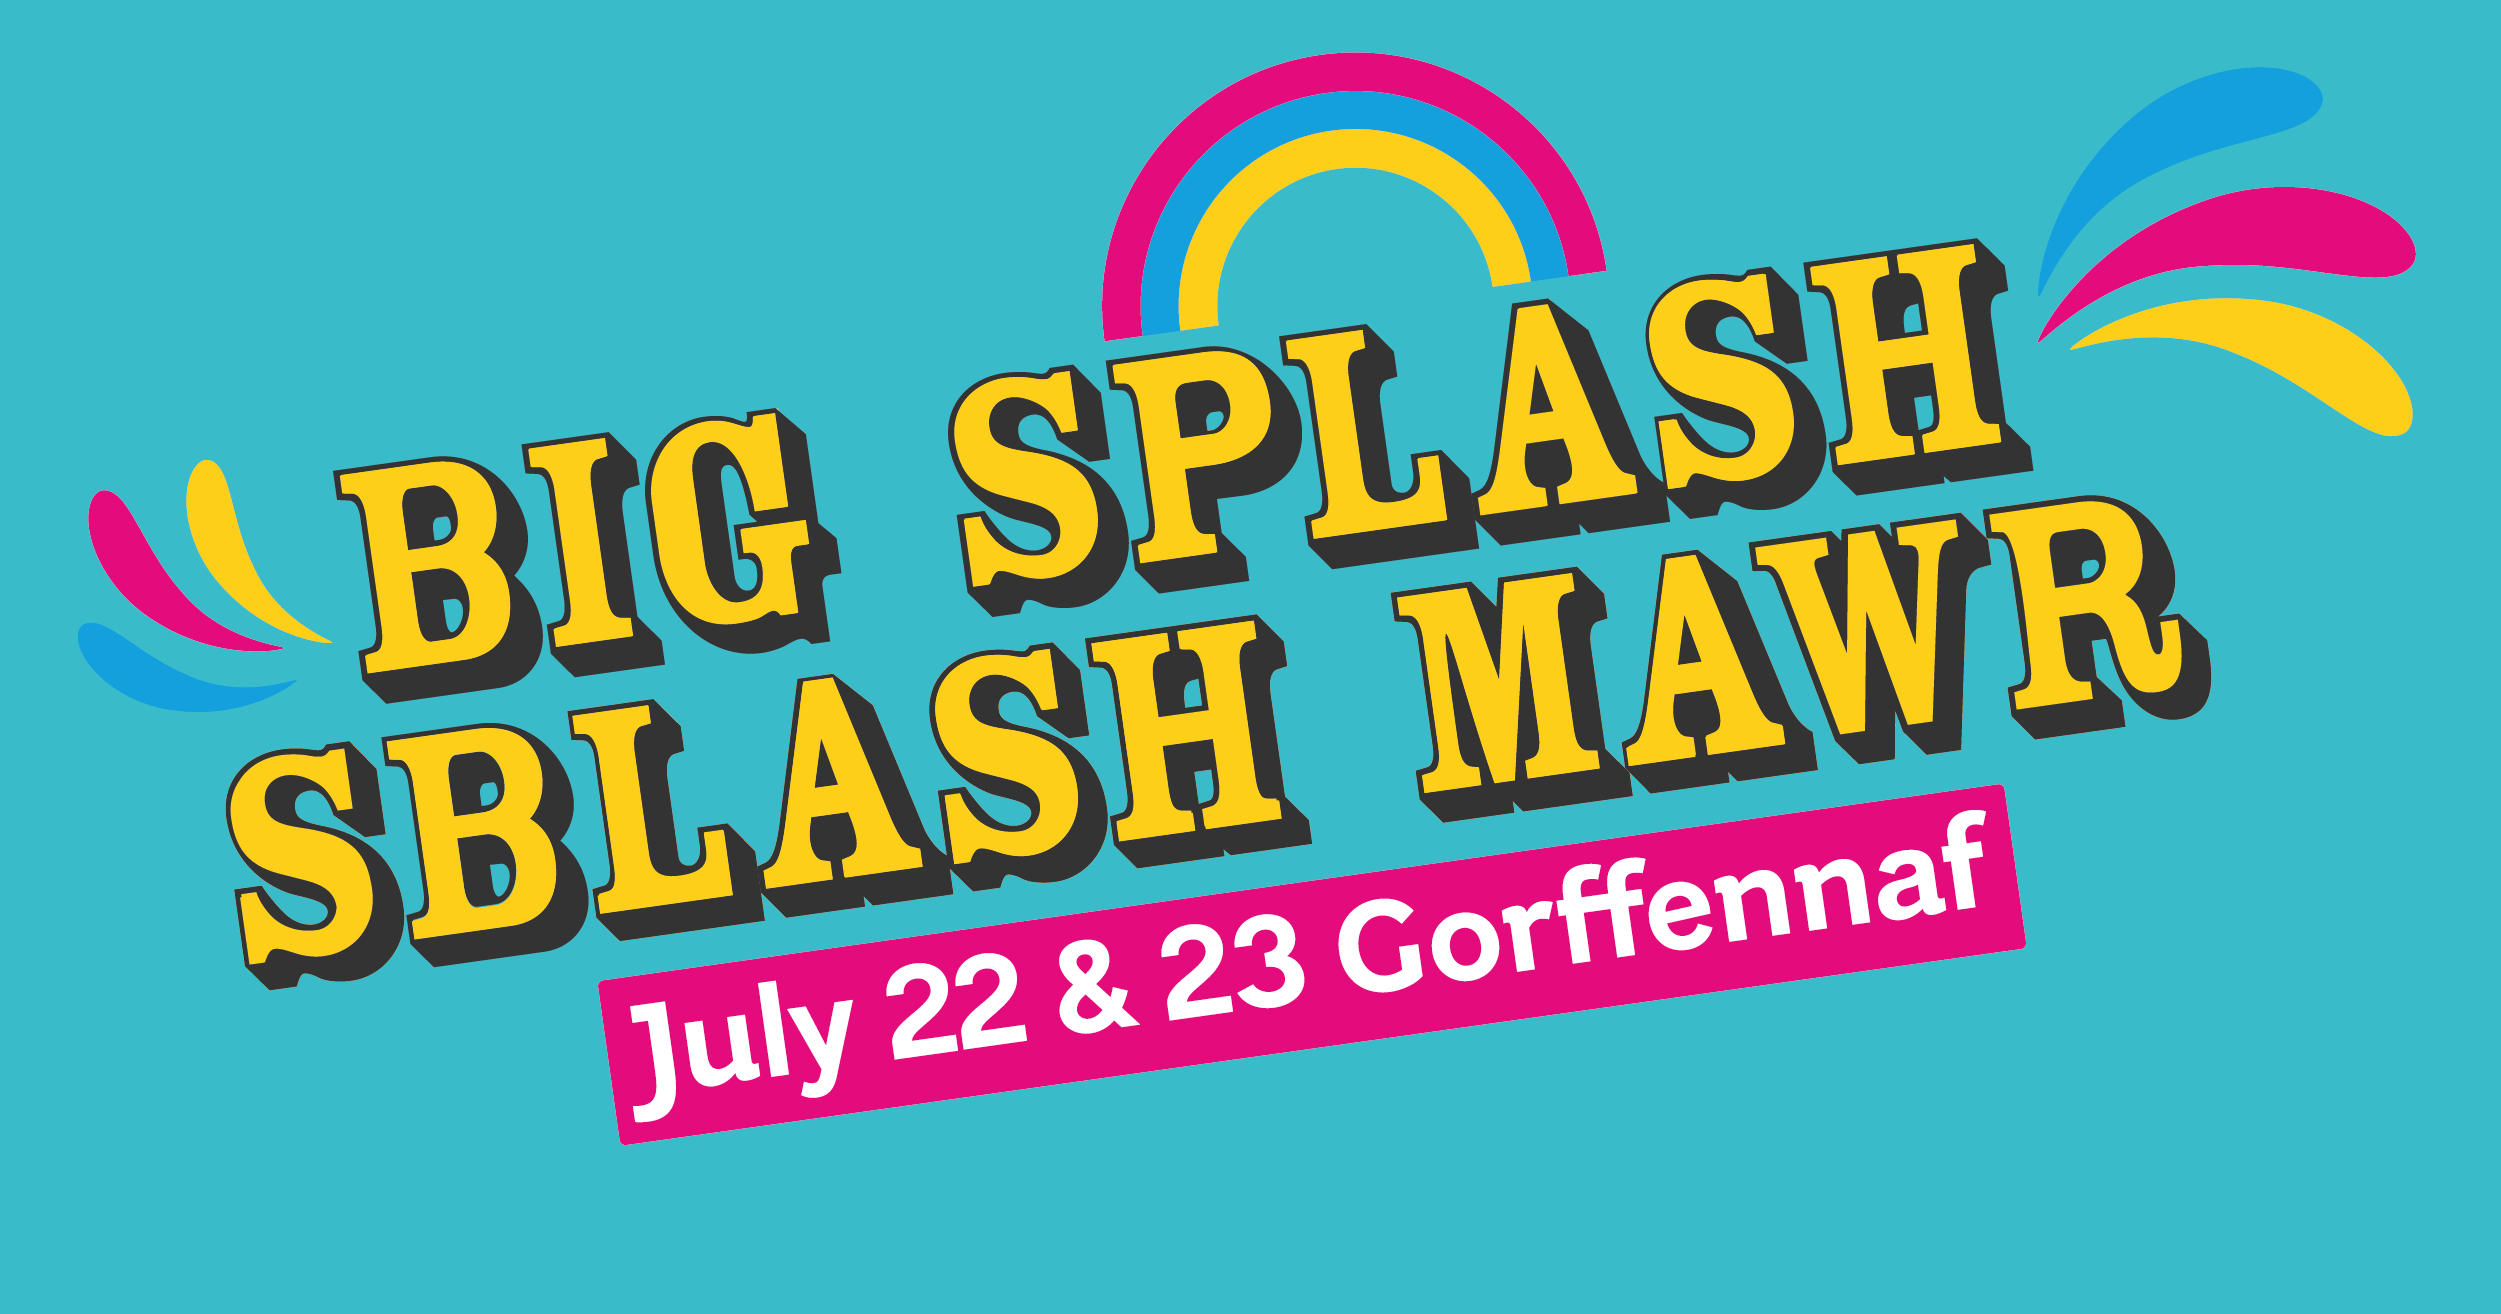 The Big Splash Festival is Coming Back to Newport this Summer! Arts